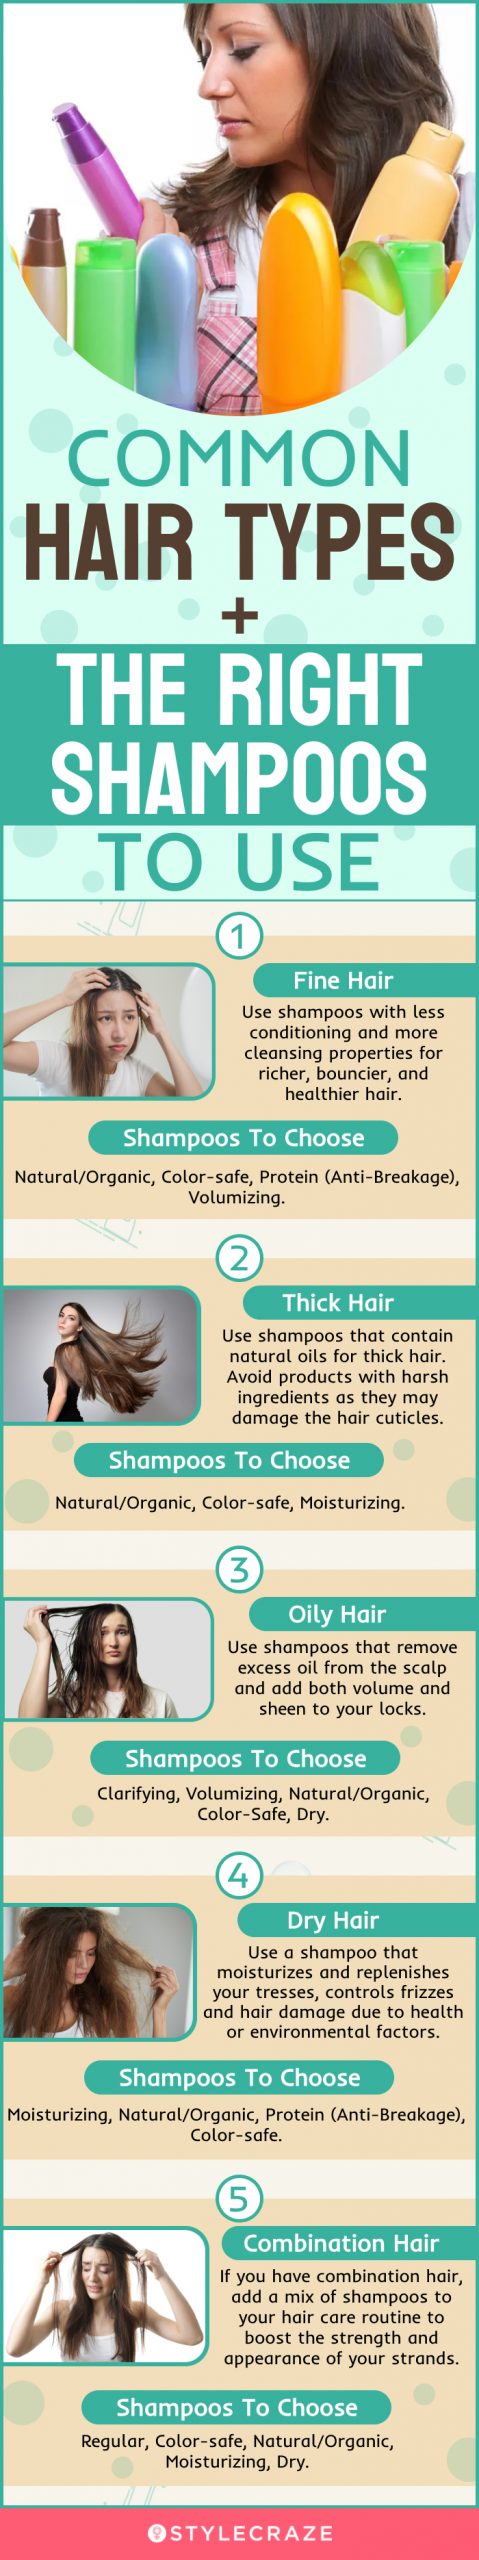 common hair types + the right shampoos to use [infographic]